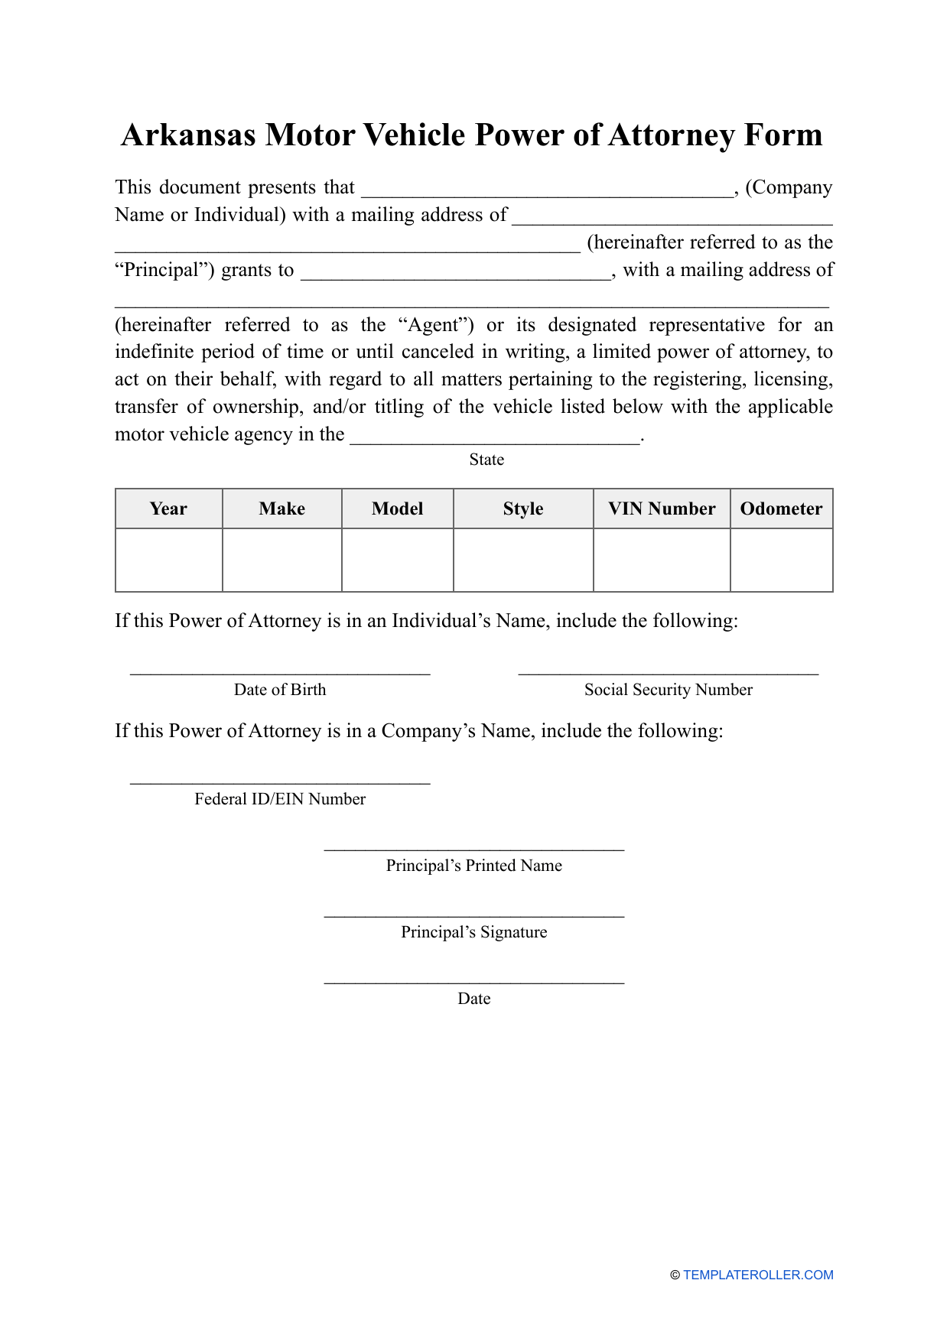 Motor Vehicle Power of Attorney Form - Arkansas, Page 1